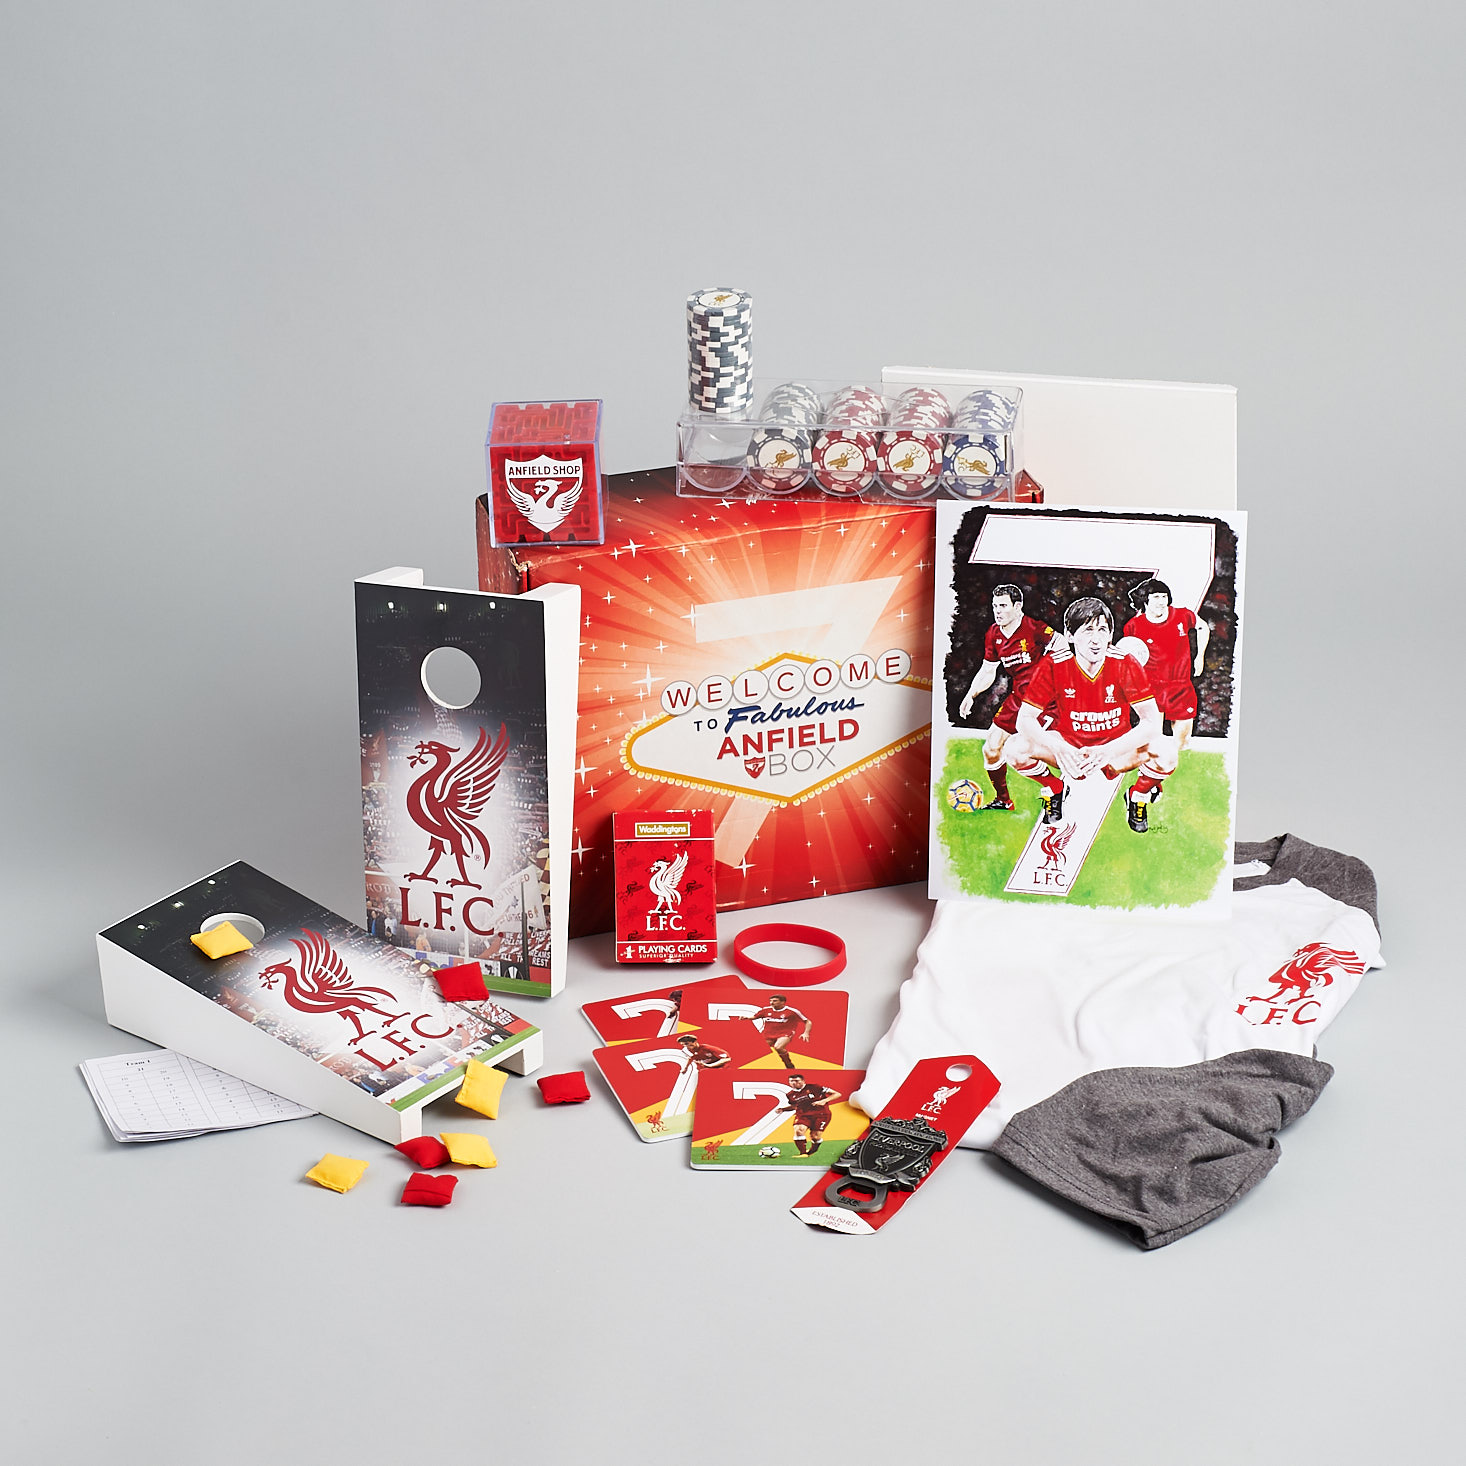 The Anfield Box Subscription Box Review – Game Night Box